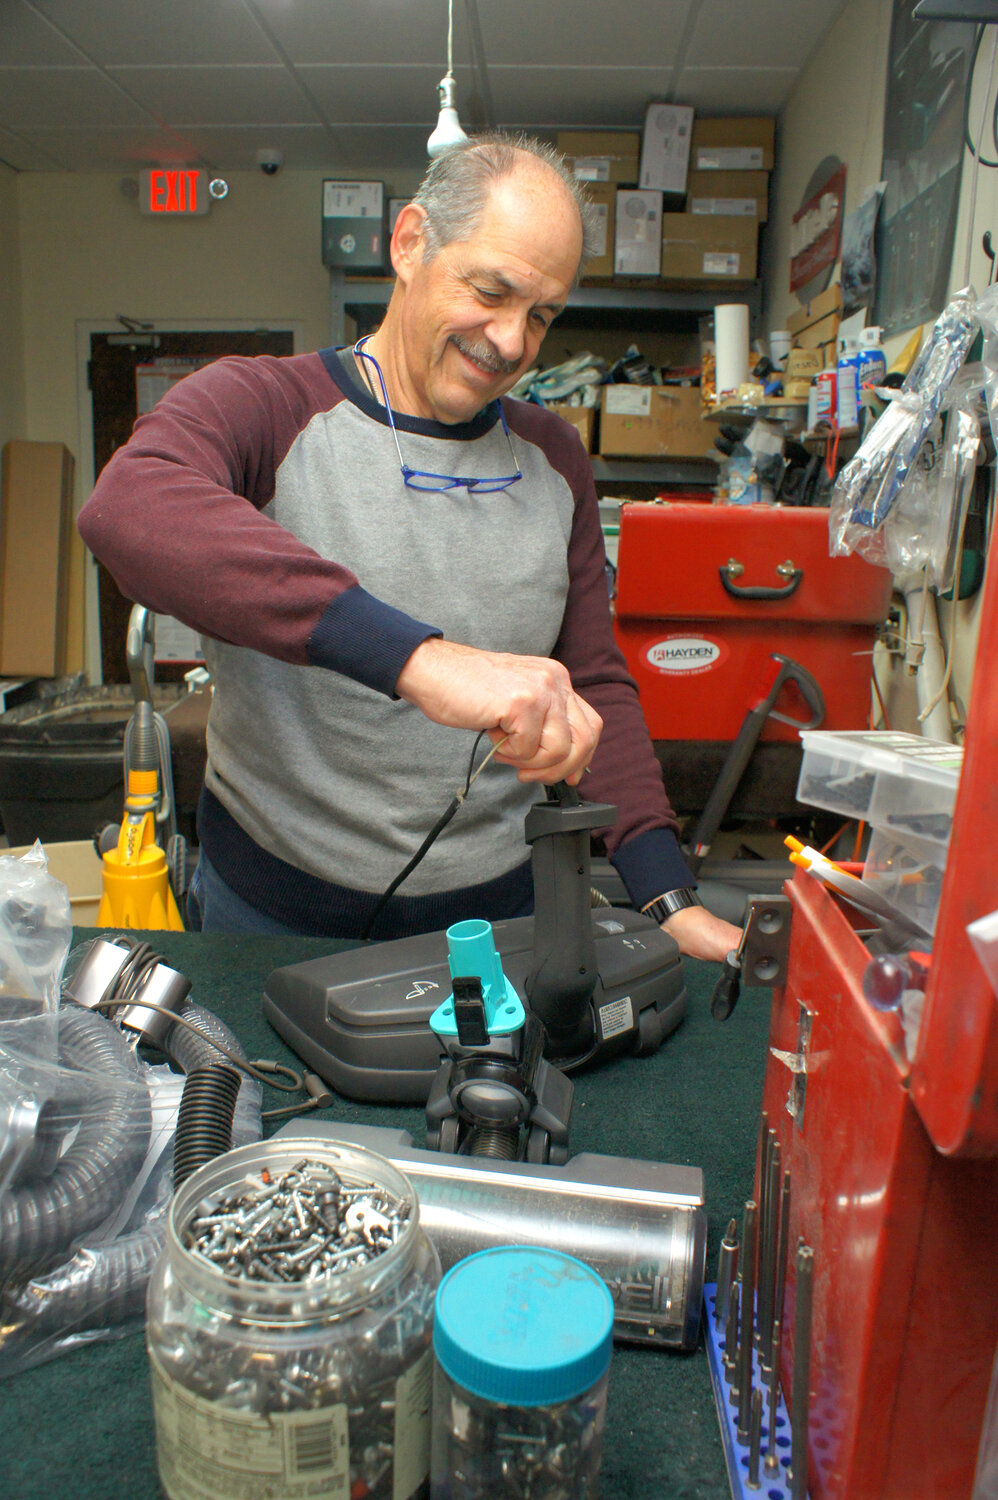 Russ checked the circuitry in a motorized nozzle/brush assembly at one of A-1's repair tables.